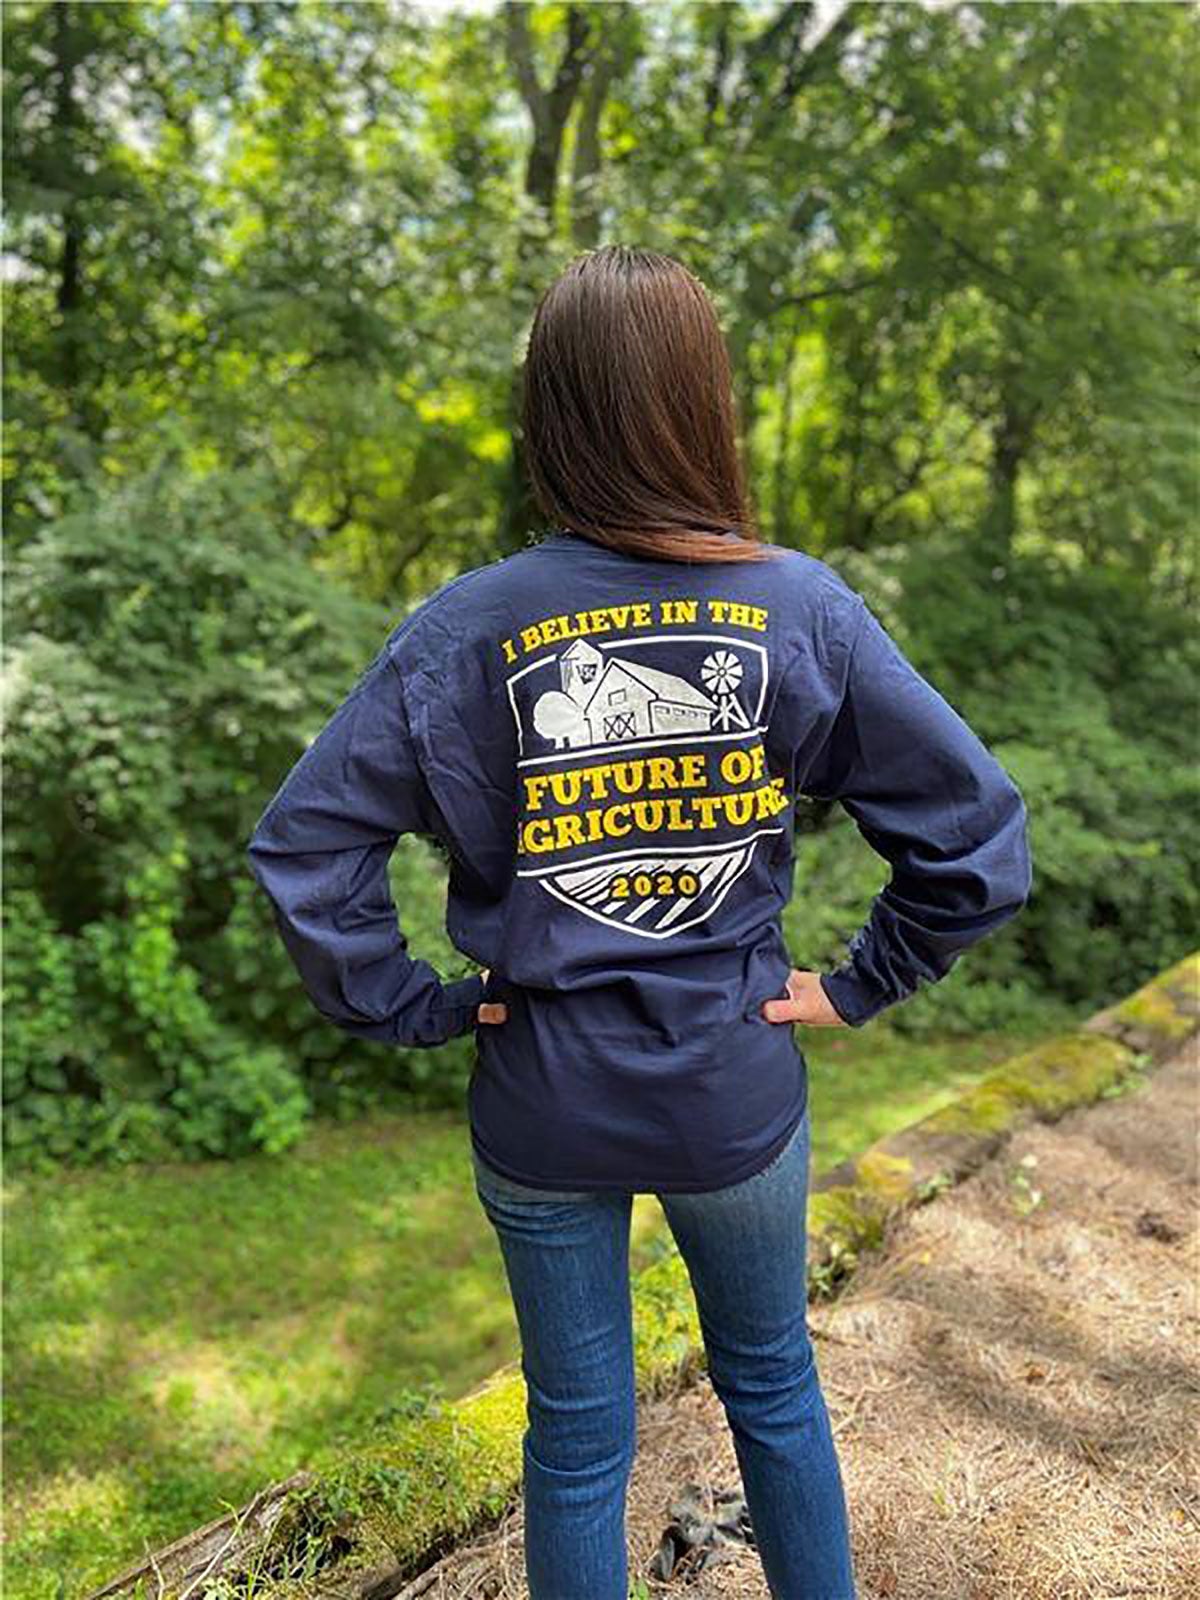 Tractor Supply launches limited edition Tshirt in support of FFA AGDAILY